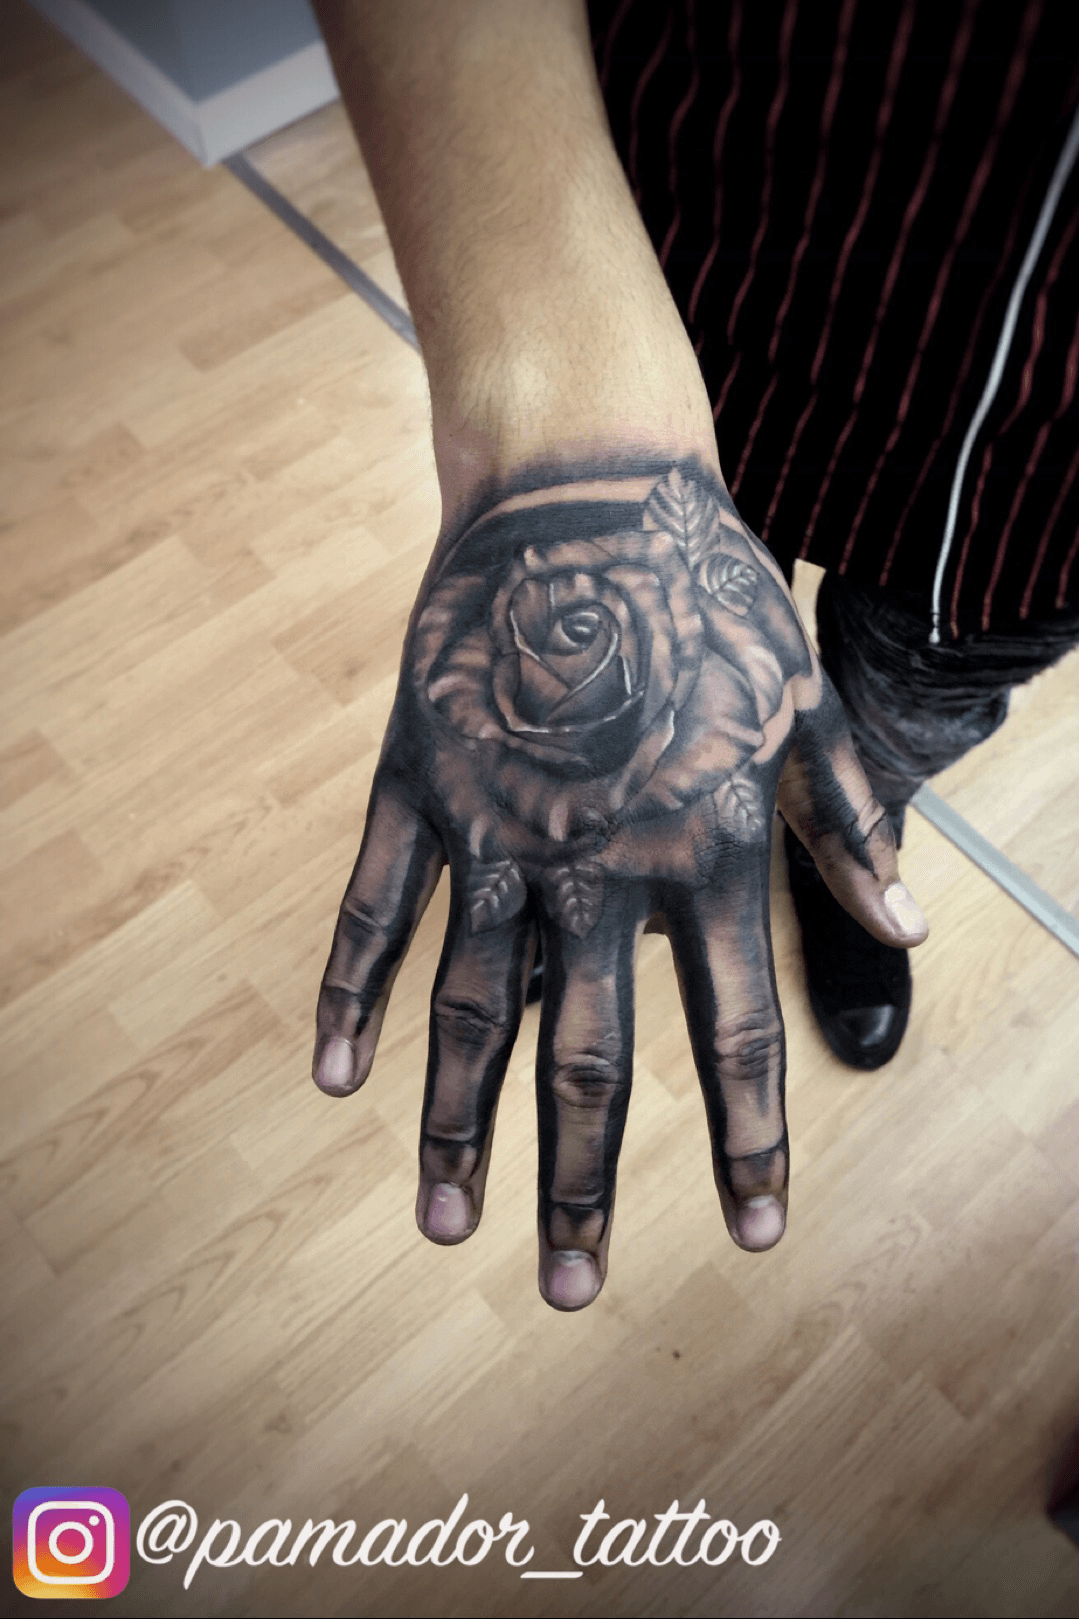 Aggregate more than 69 skeleton hand rose tattoo best - in.eteachers